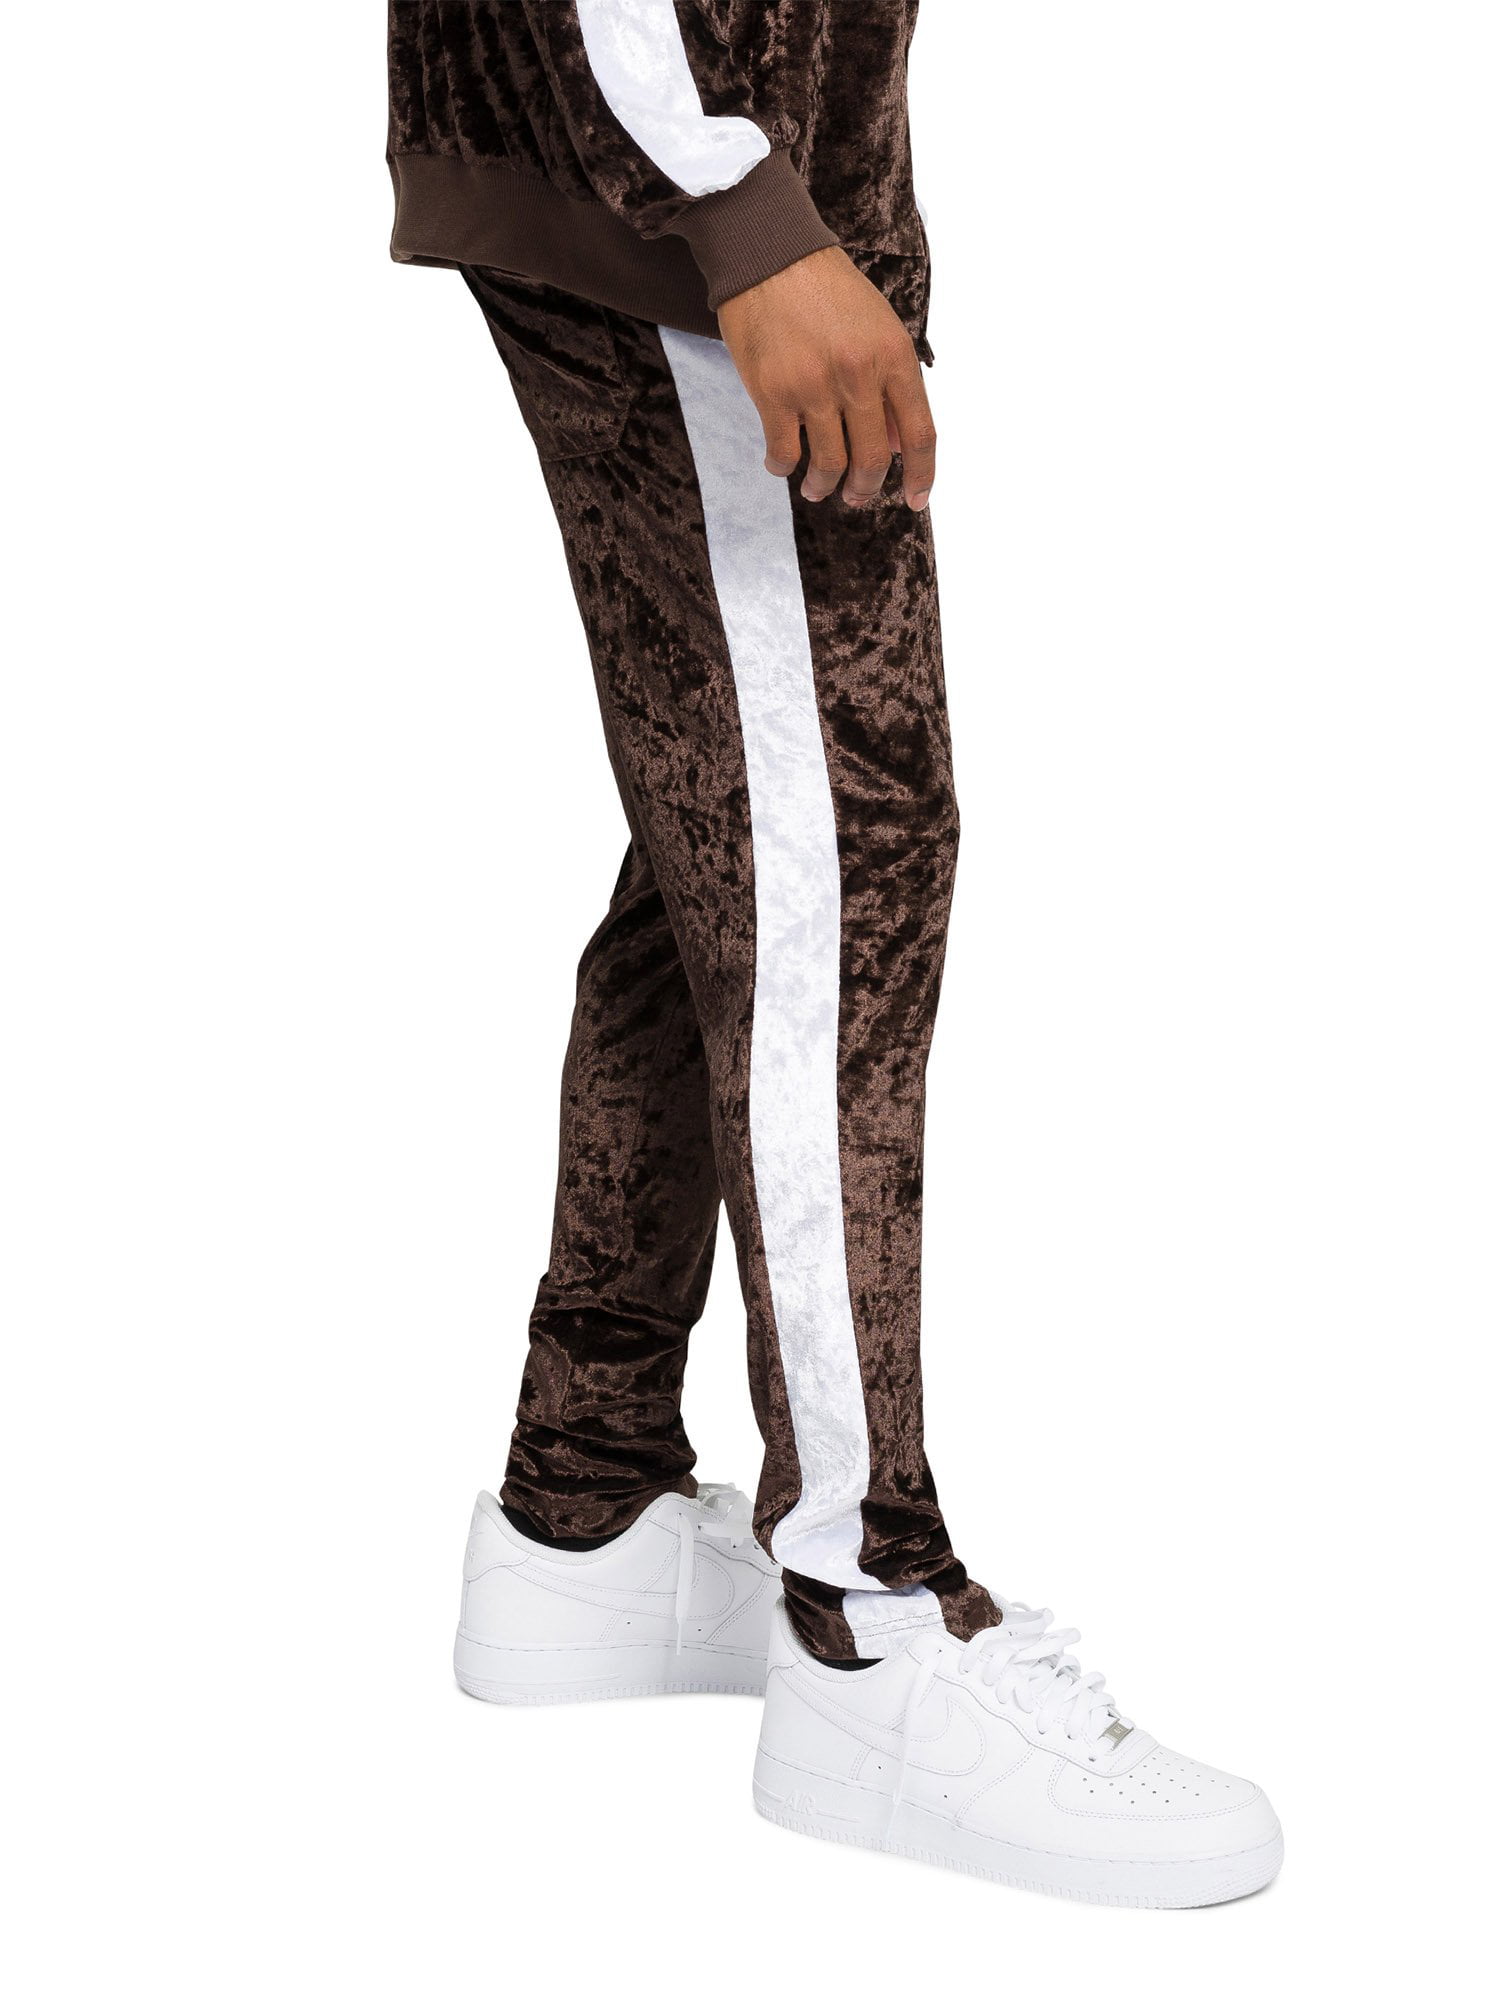 G-Style USA Men's Velvet Velour Tracksuit Set, Zipper Jacket and Sweatpants, Up to 5X, Size: 1XL, Brown